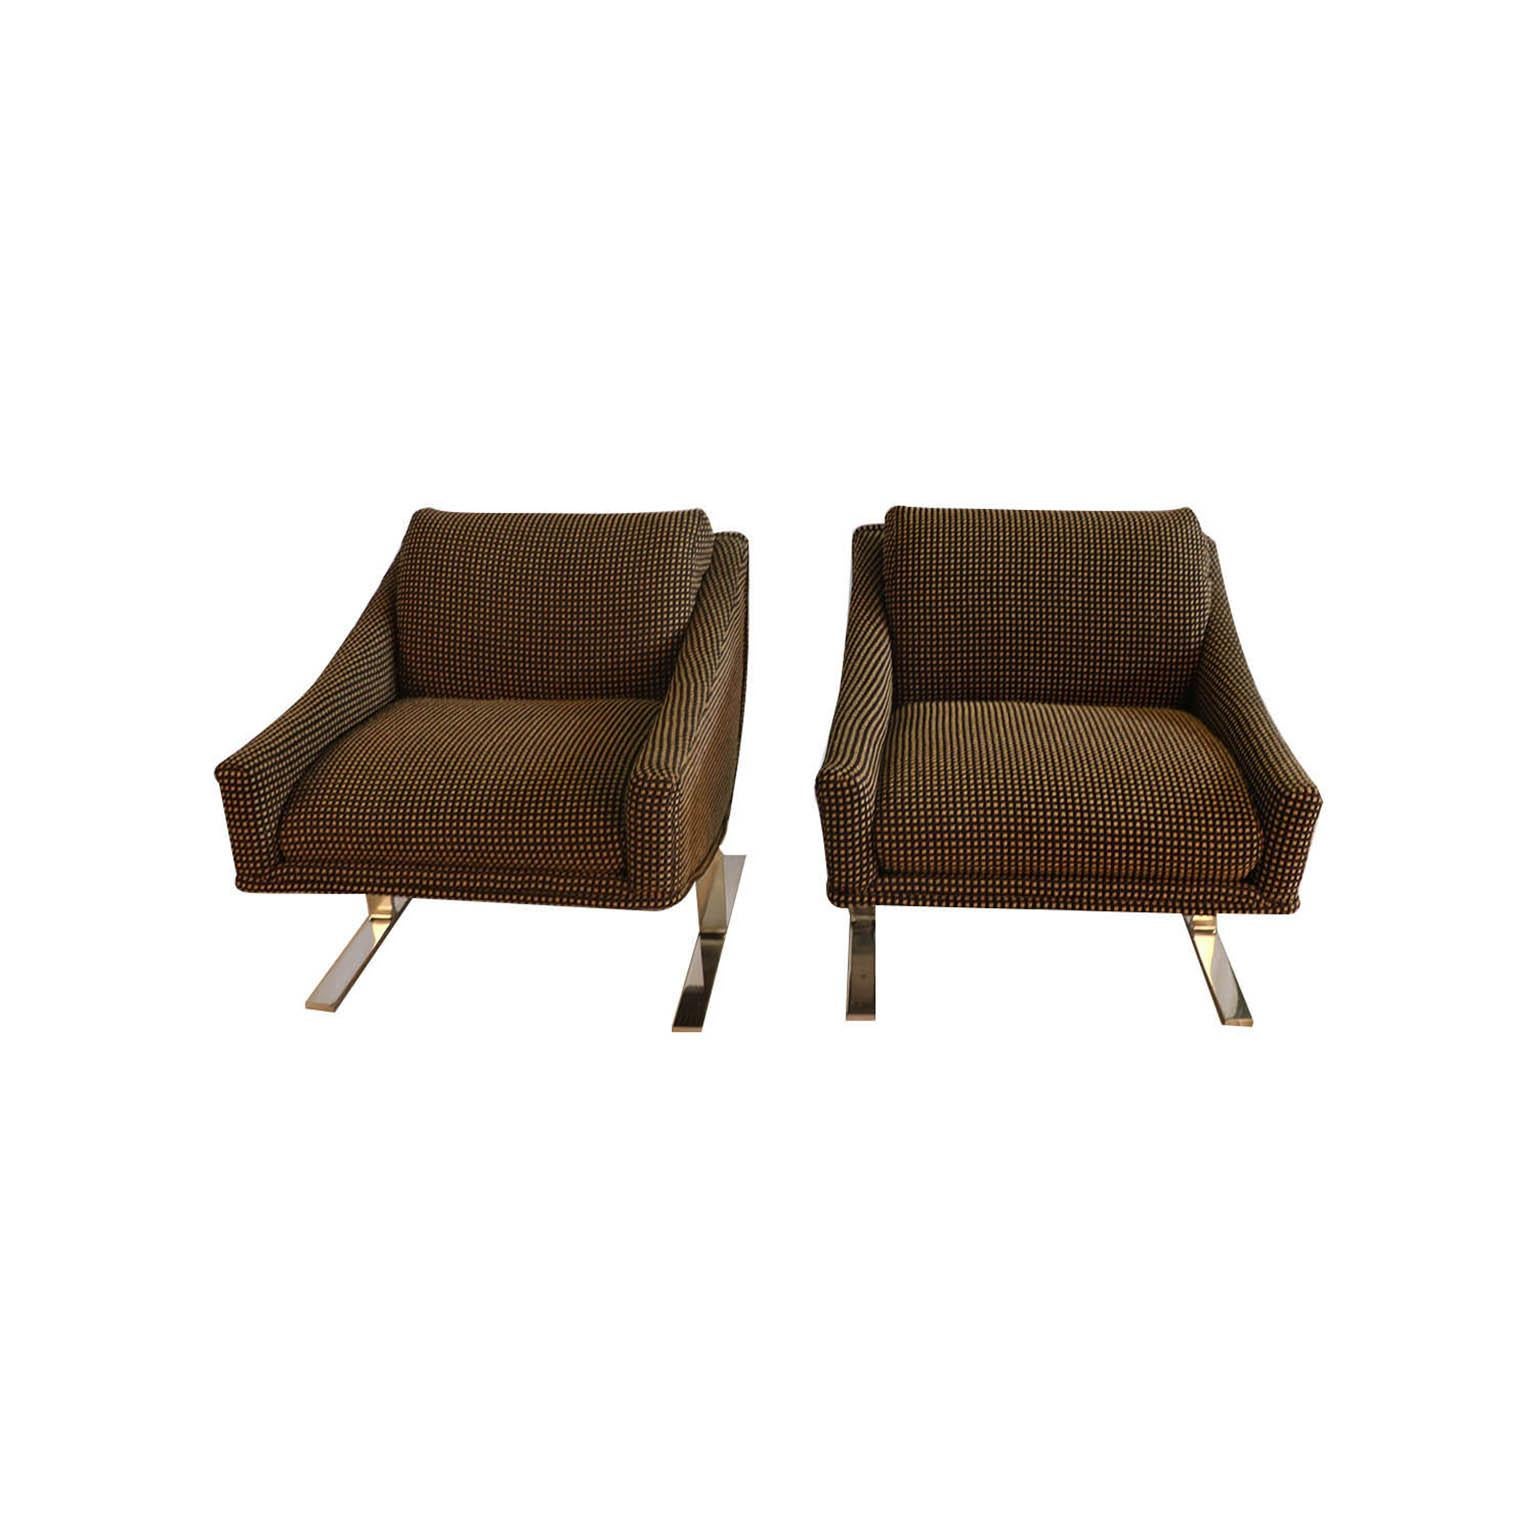 Polished Midcentury Kipp Stewart “Arc Lounge Chairs” for Directional For Sale